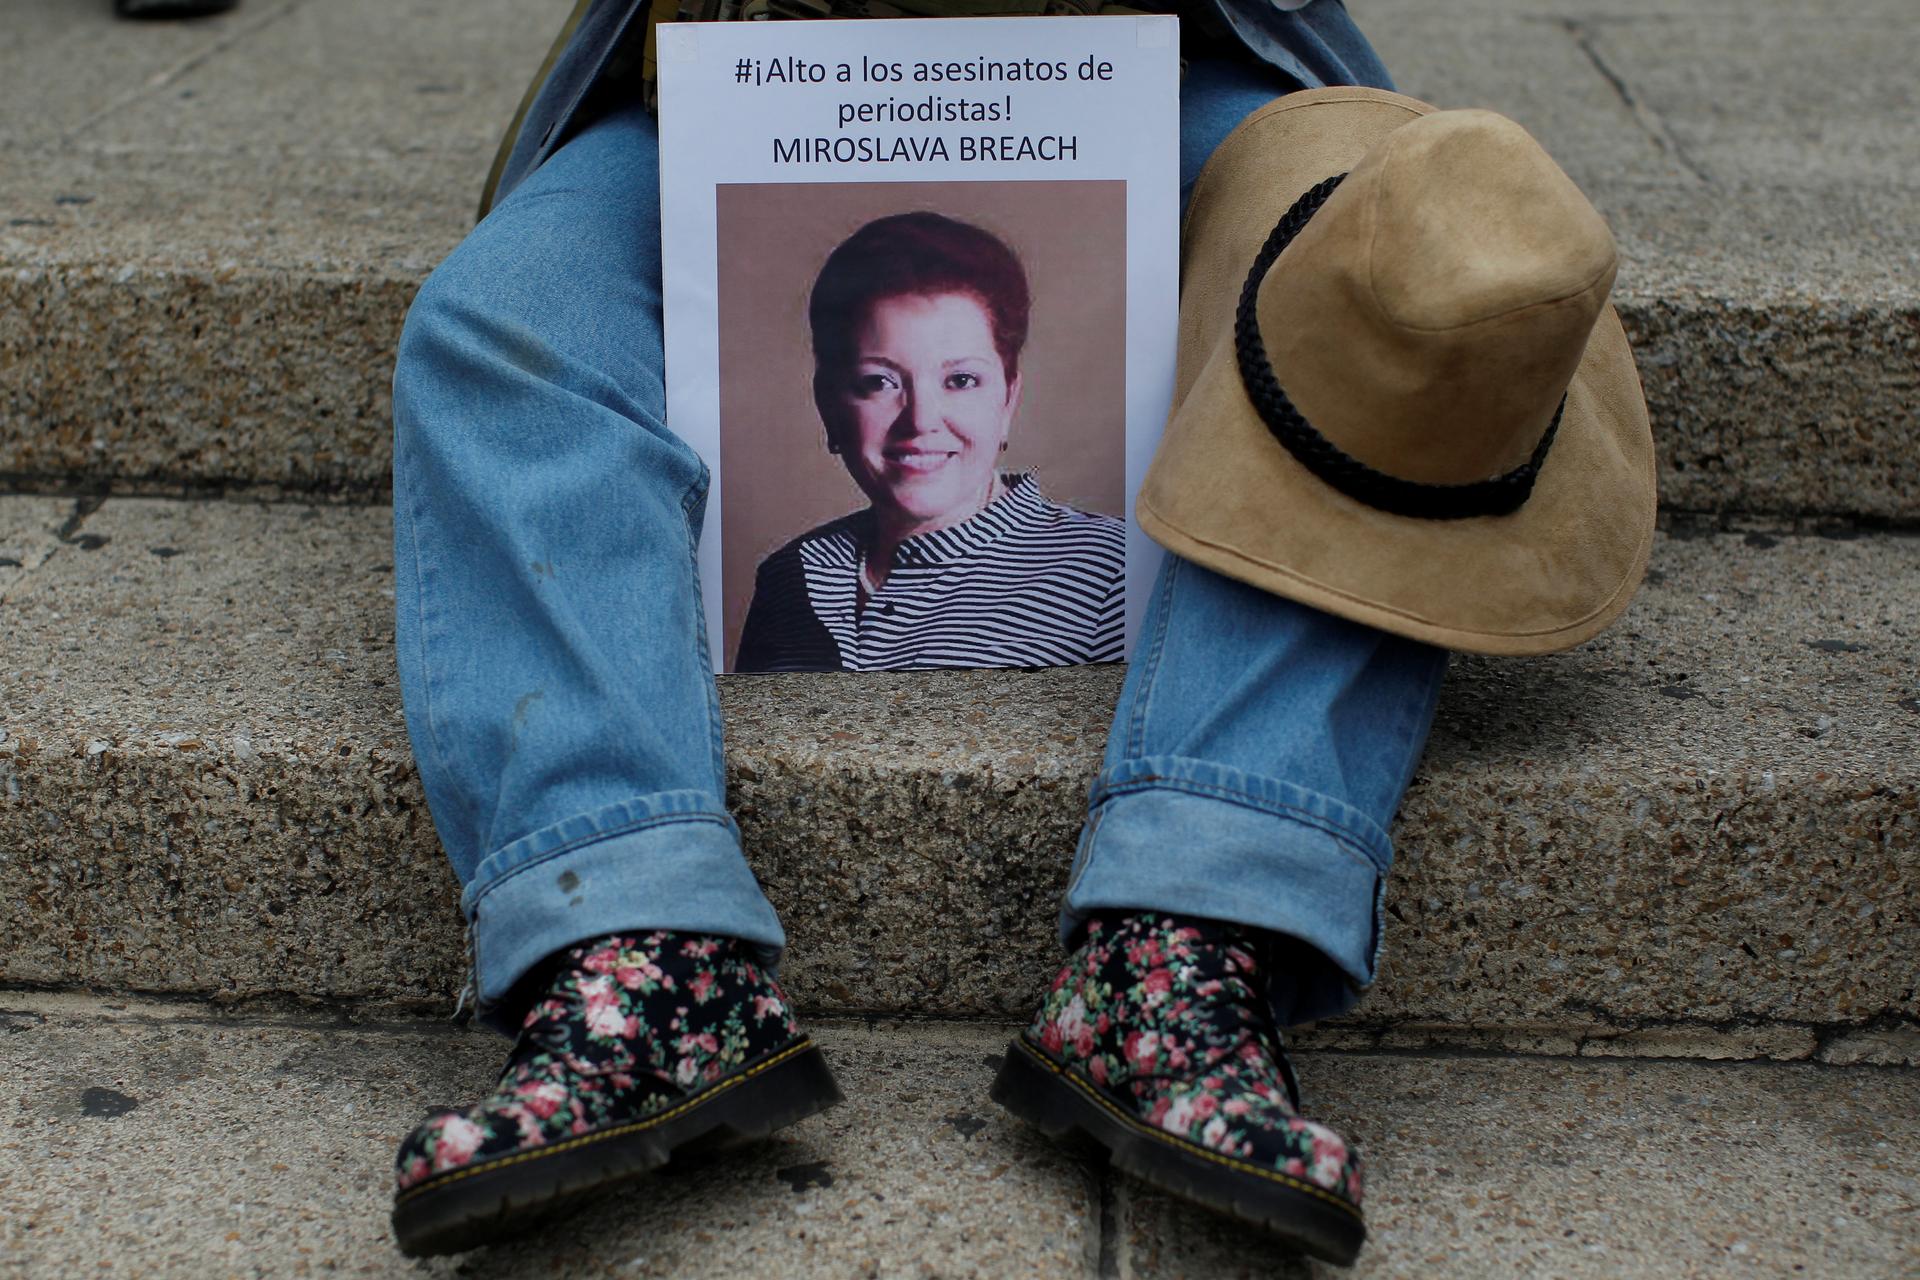 A picture of the Mexican journalist Miroslava Breach is seen during a protest against the murder of Miroslava, in Mexico City, Mexico March 25, 2017. Picture reads 